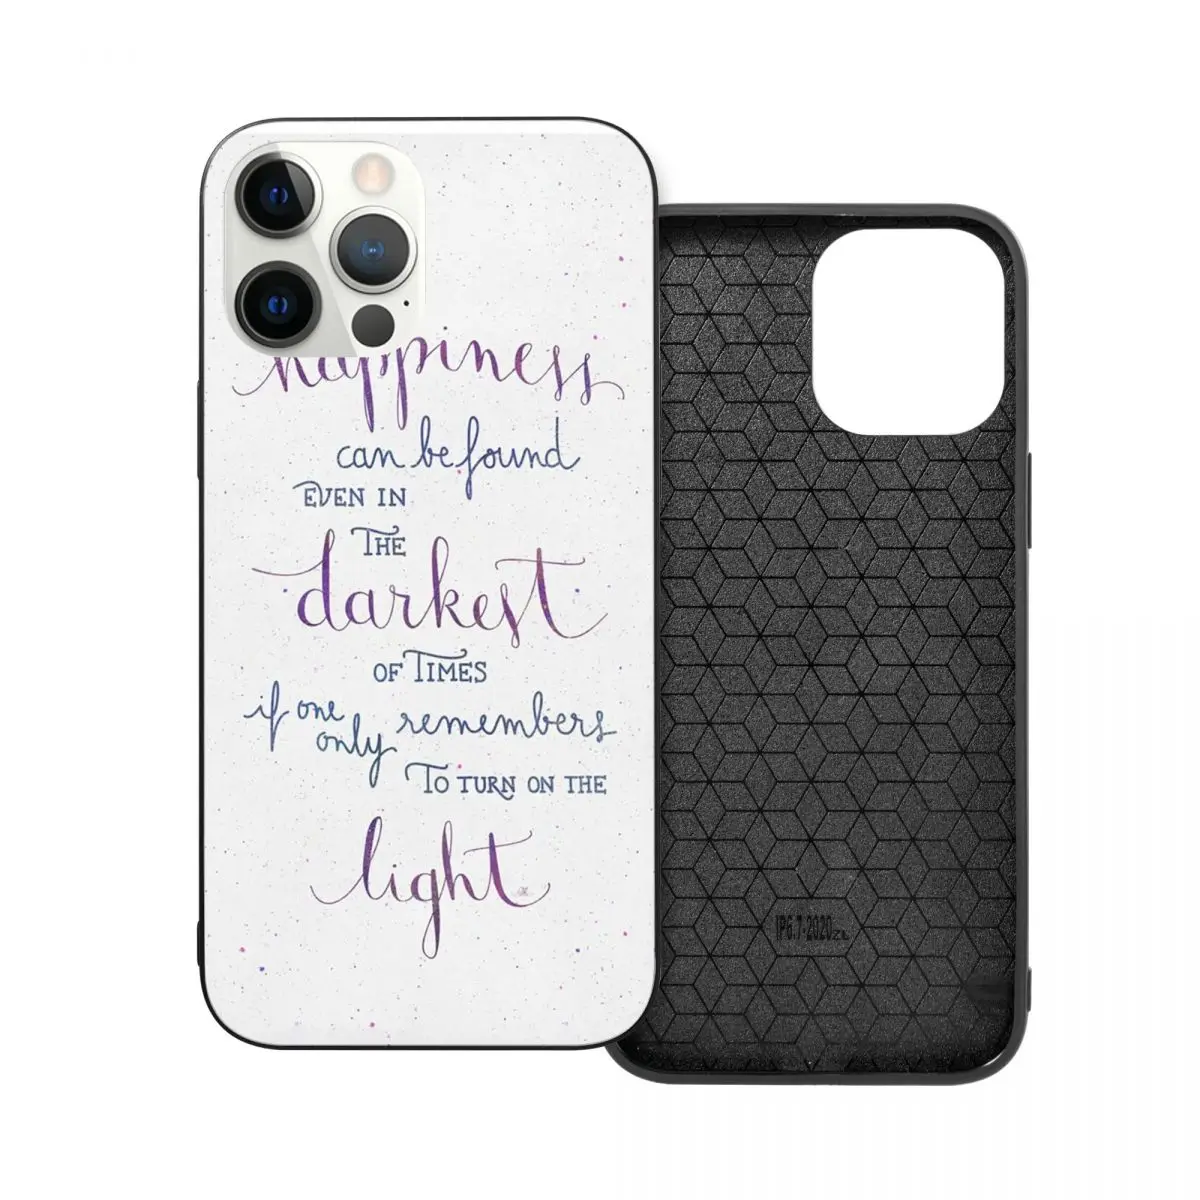 

Happiness Can Be Found Even In The Darkest PC Glass TPU Phone Case for iPhone 13 12 11 Xs Xr X Pro Max Mini 7 8 Se2 Plus 6 6S